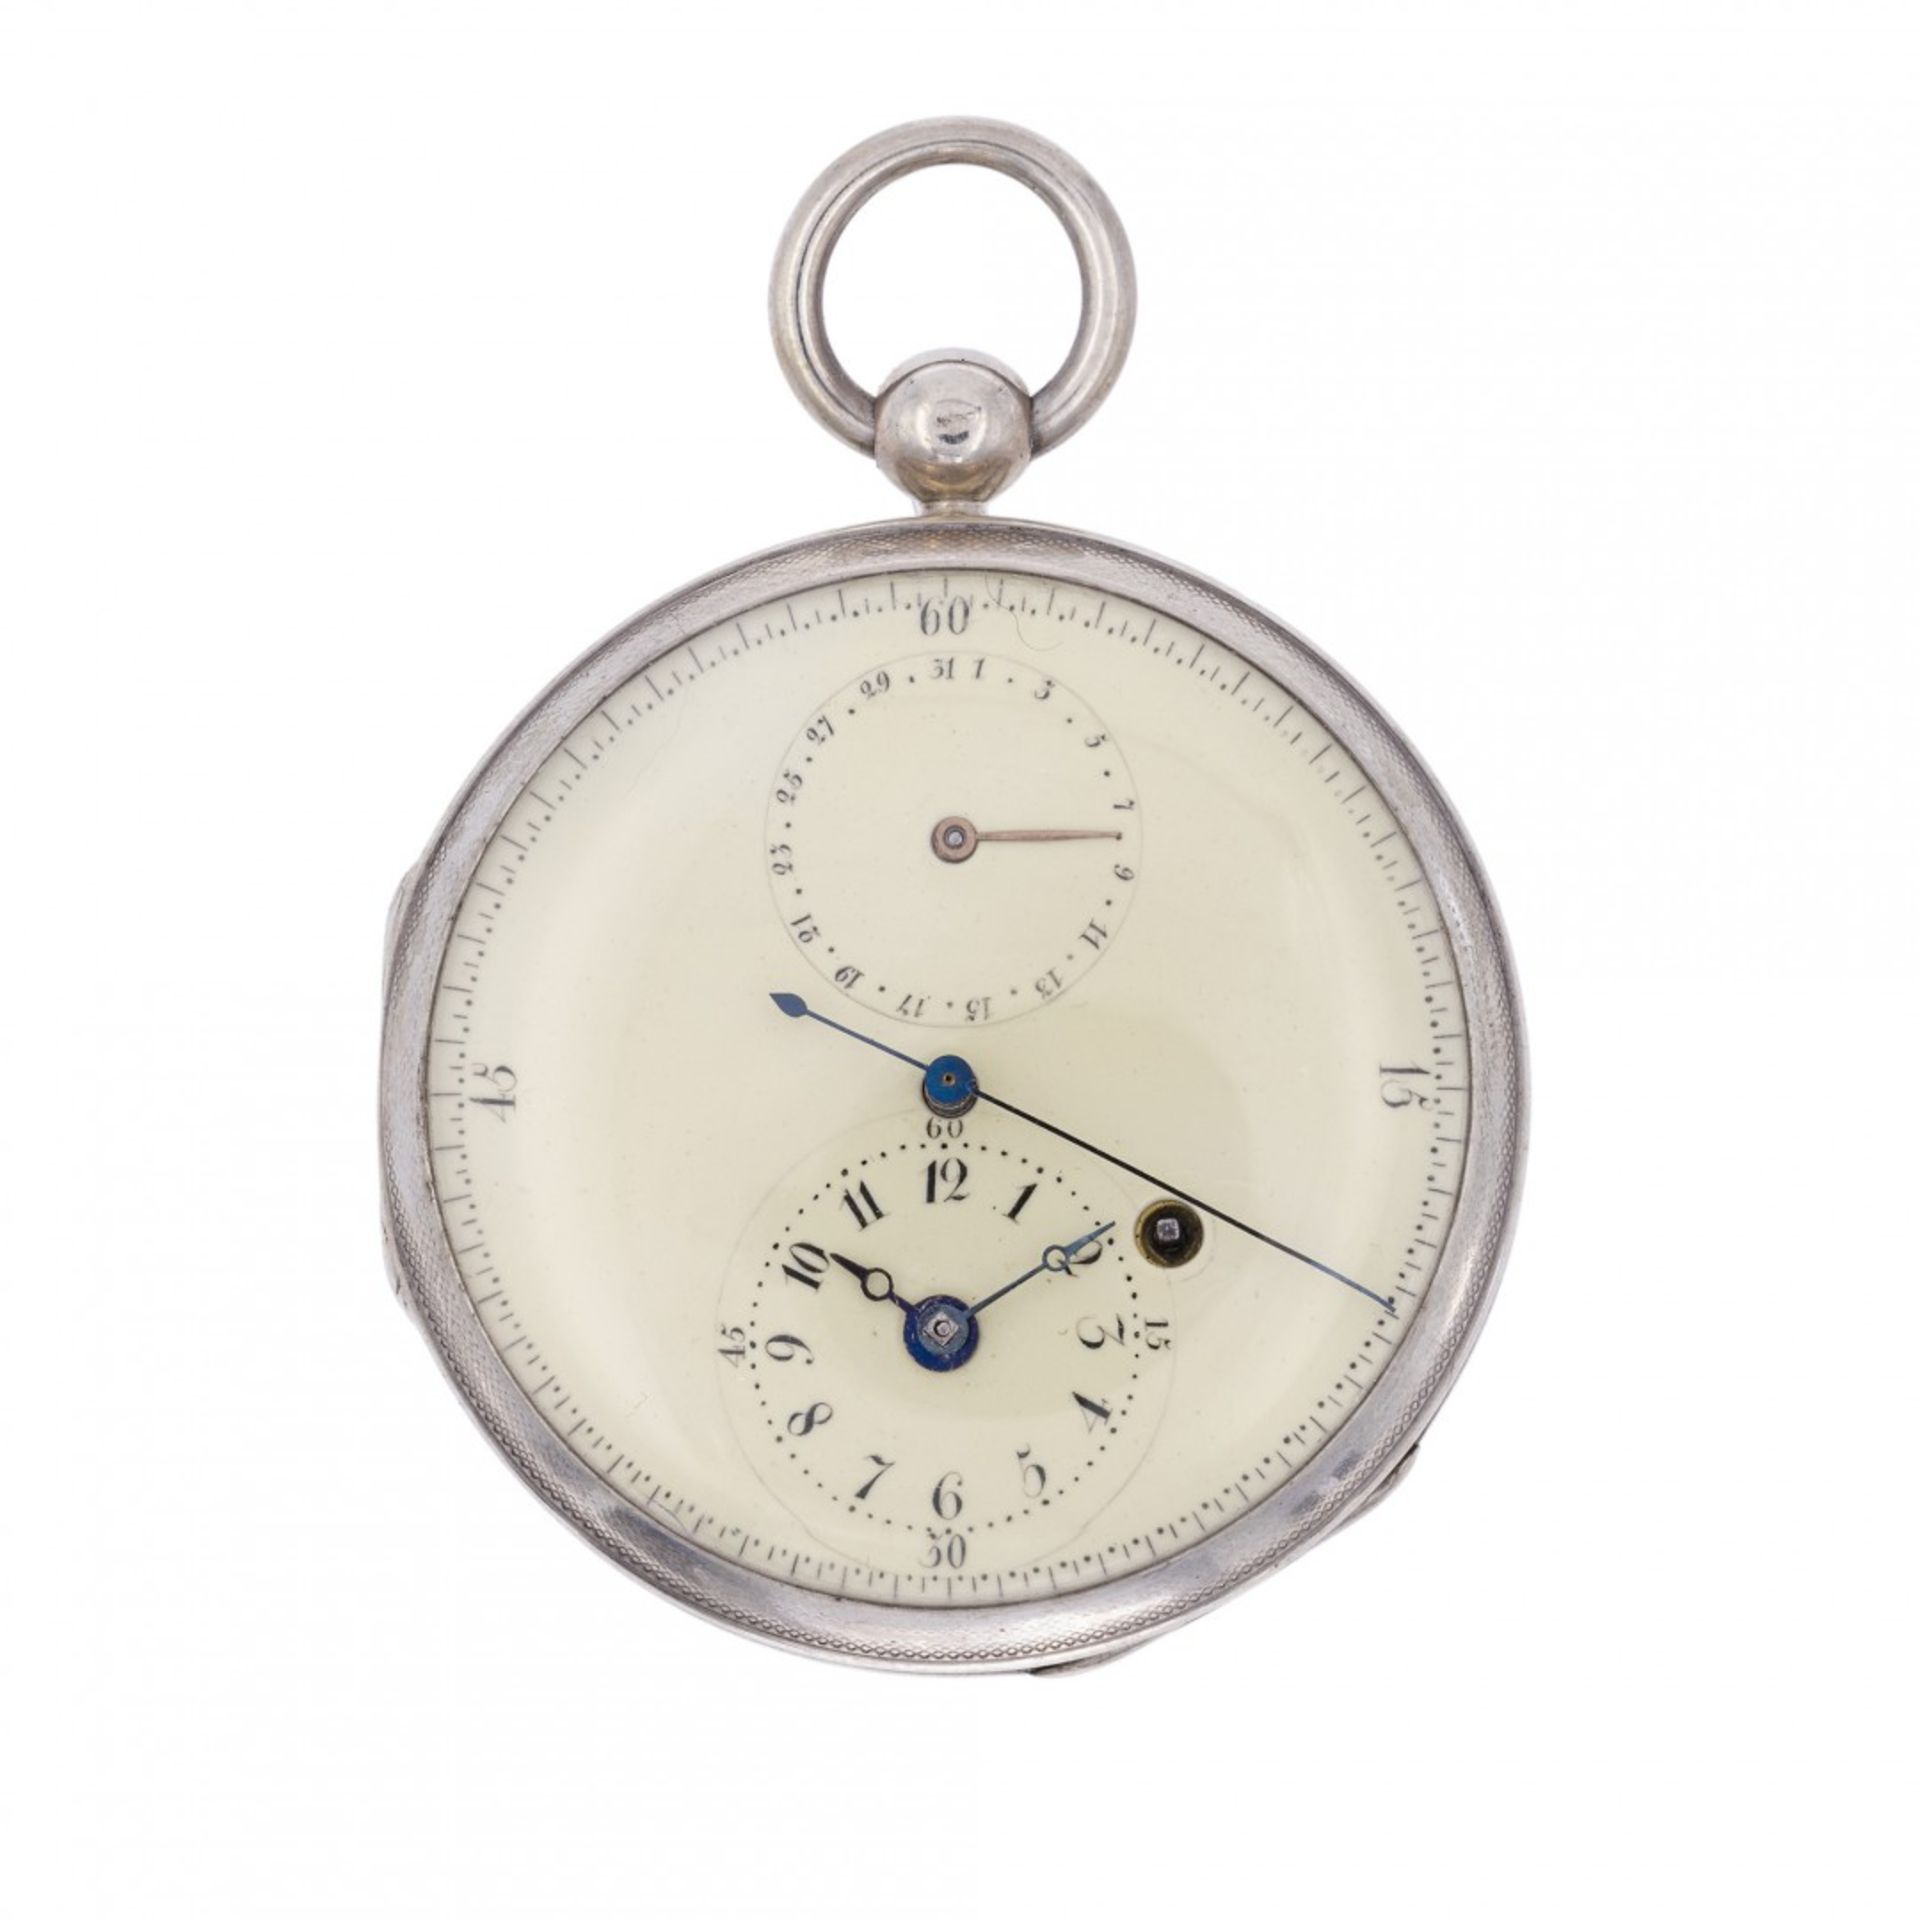 SILVER WATCH WITH CENTERED SECONDS AND CALENDAR, CIRCA 1850